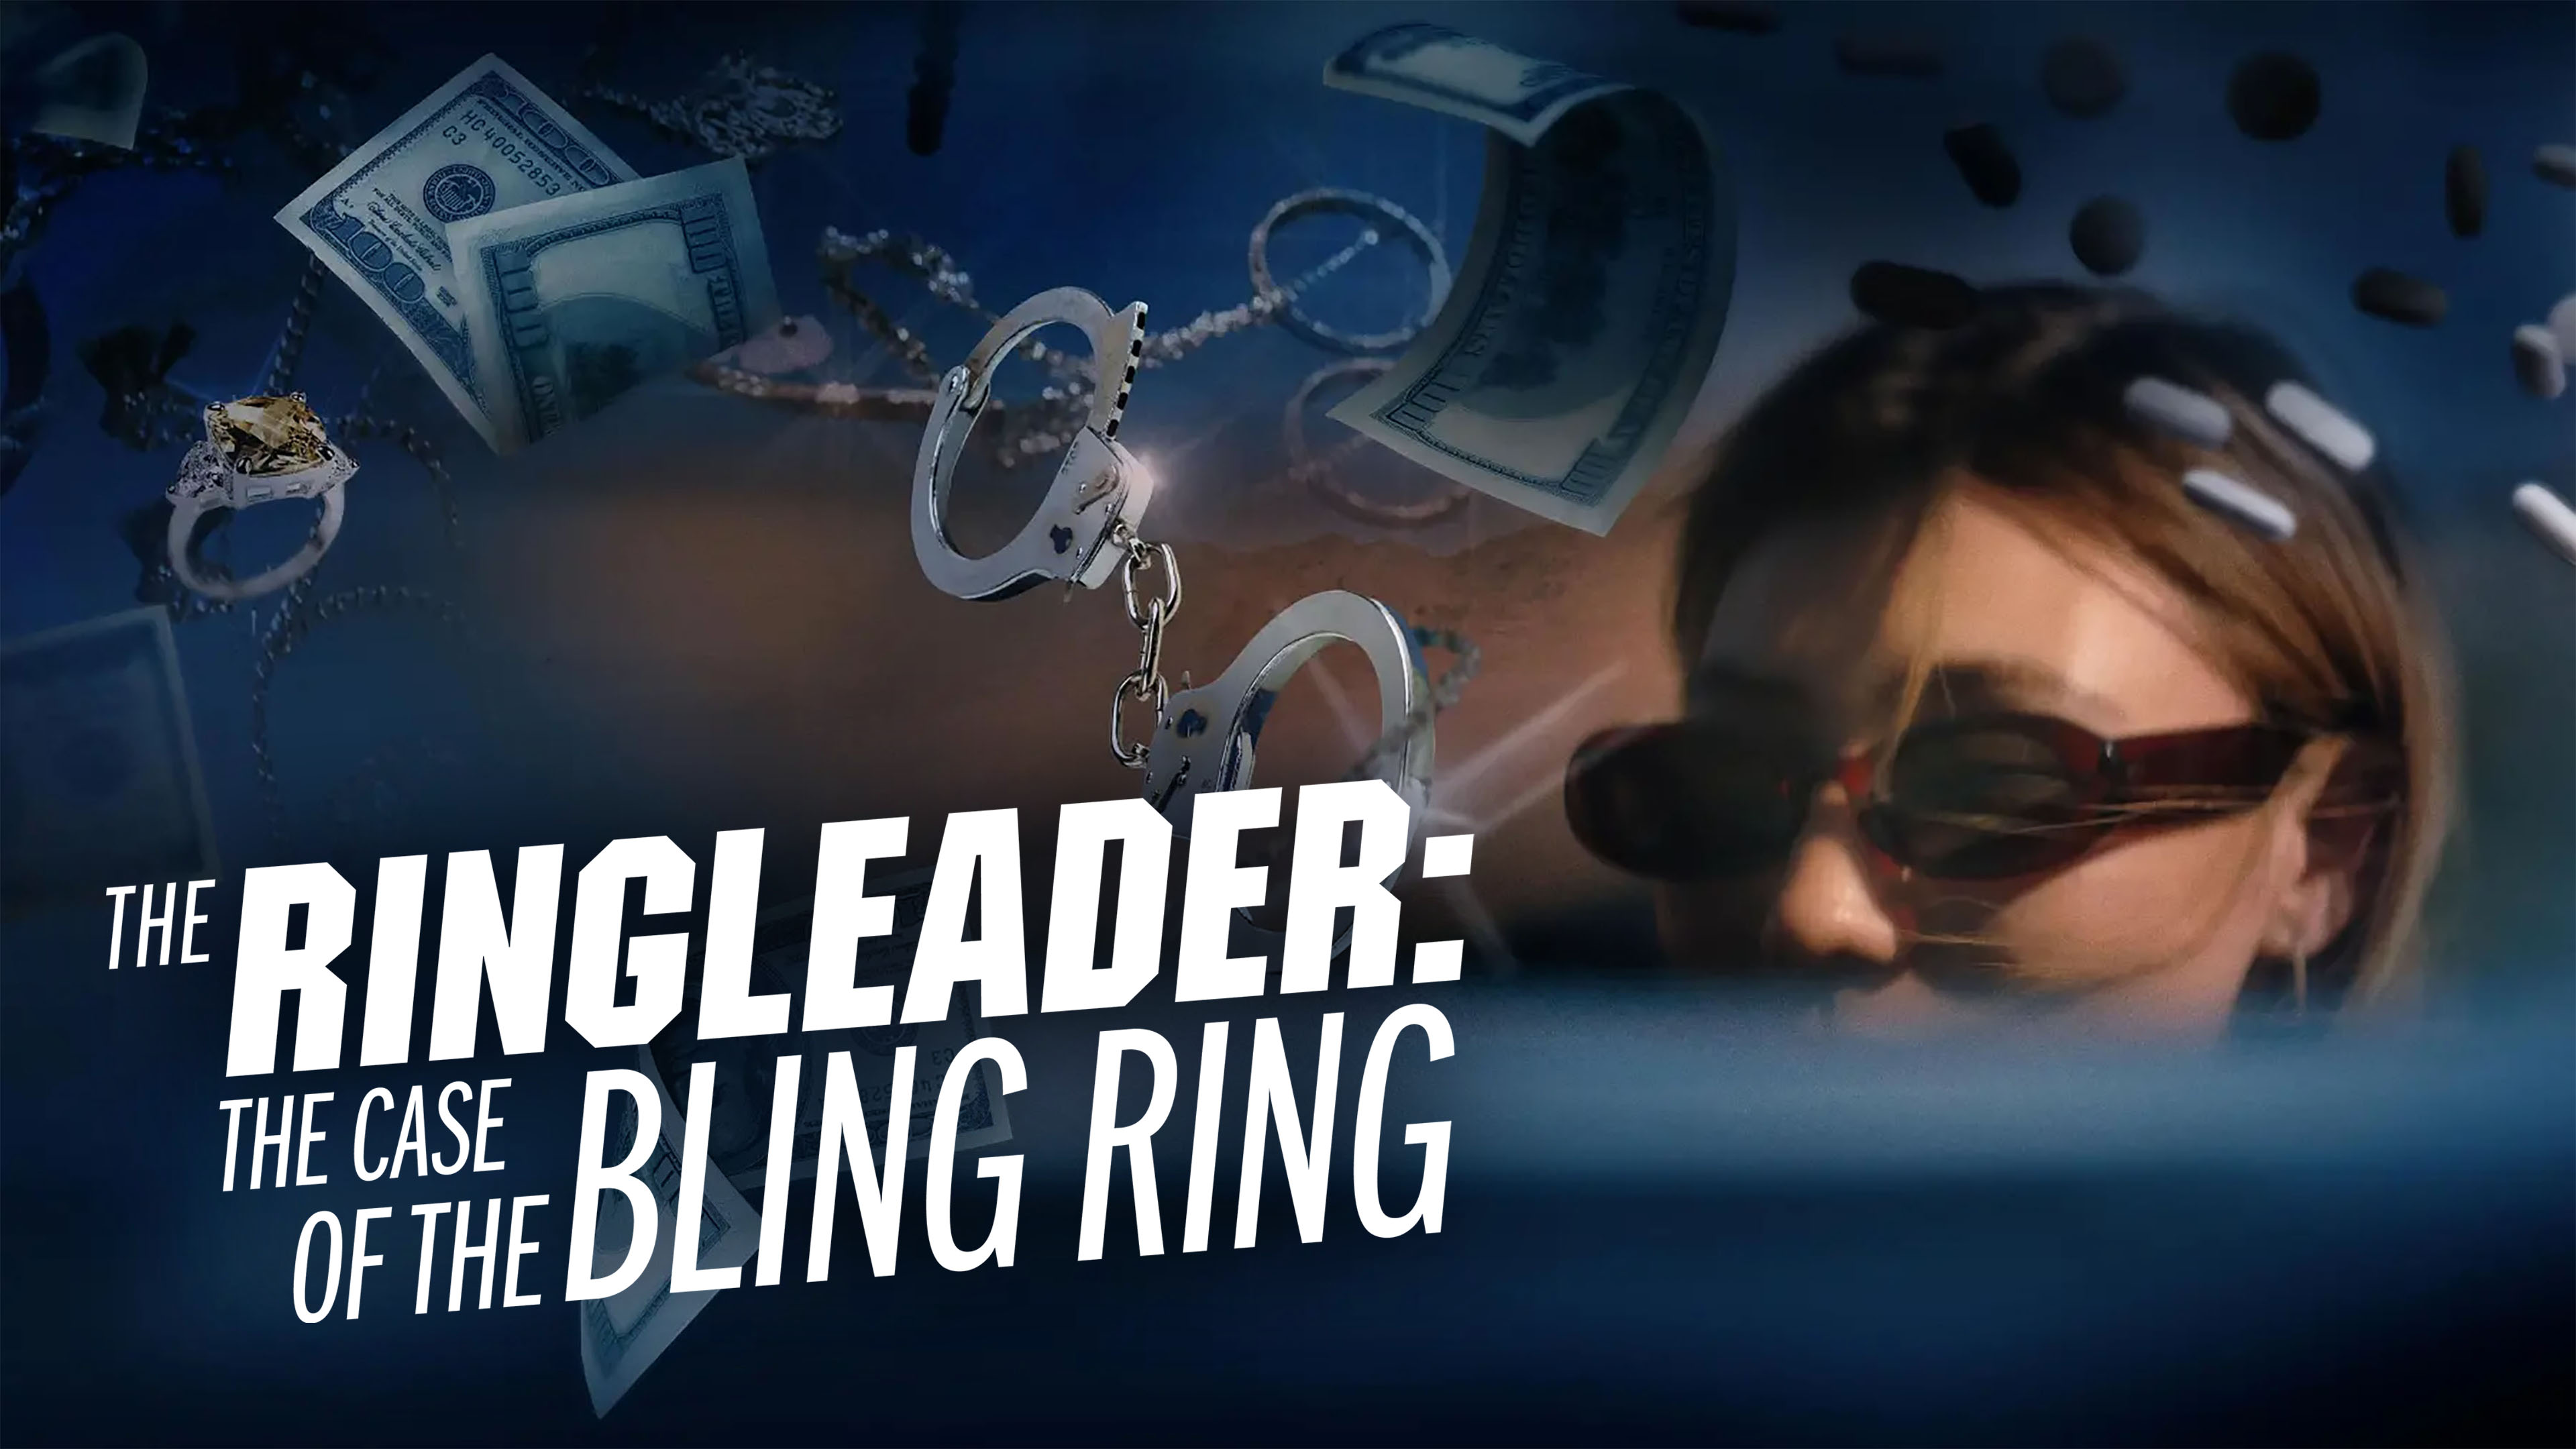 The Bling Ring Streaming: Watch & Stream Online Via HBO Max